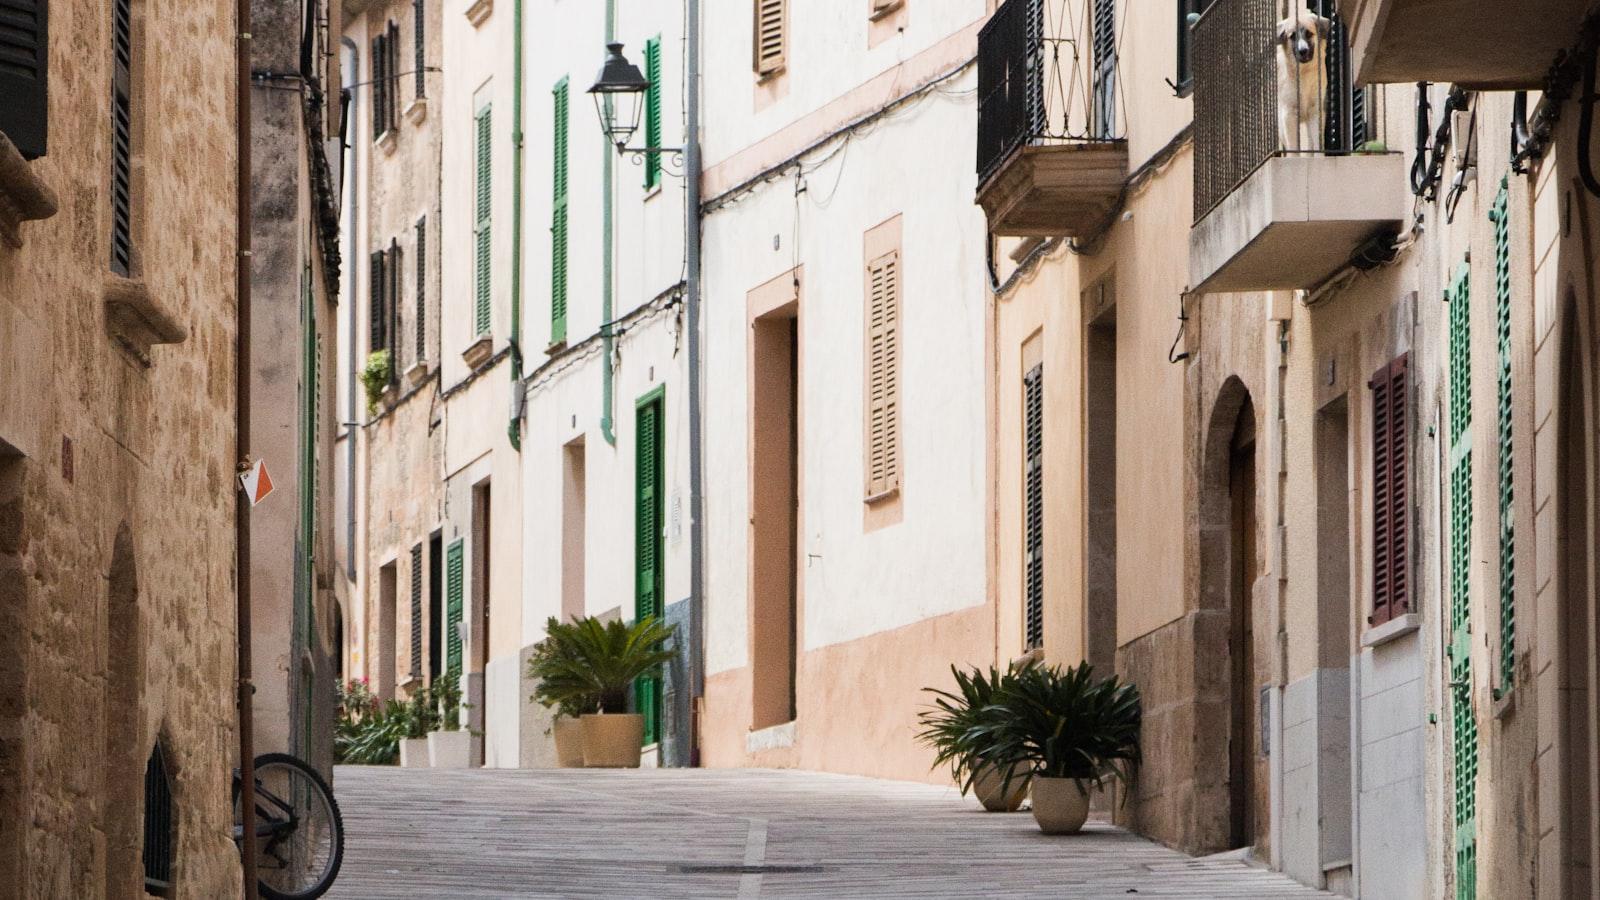 What to Know for Your First Trip to Spain